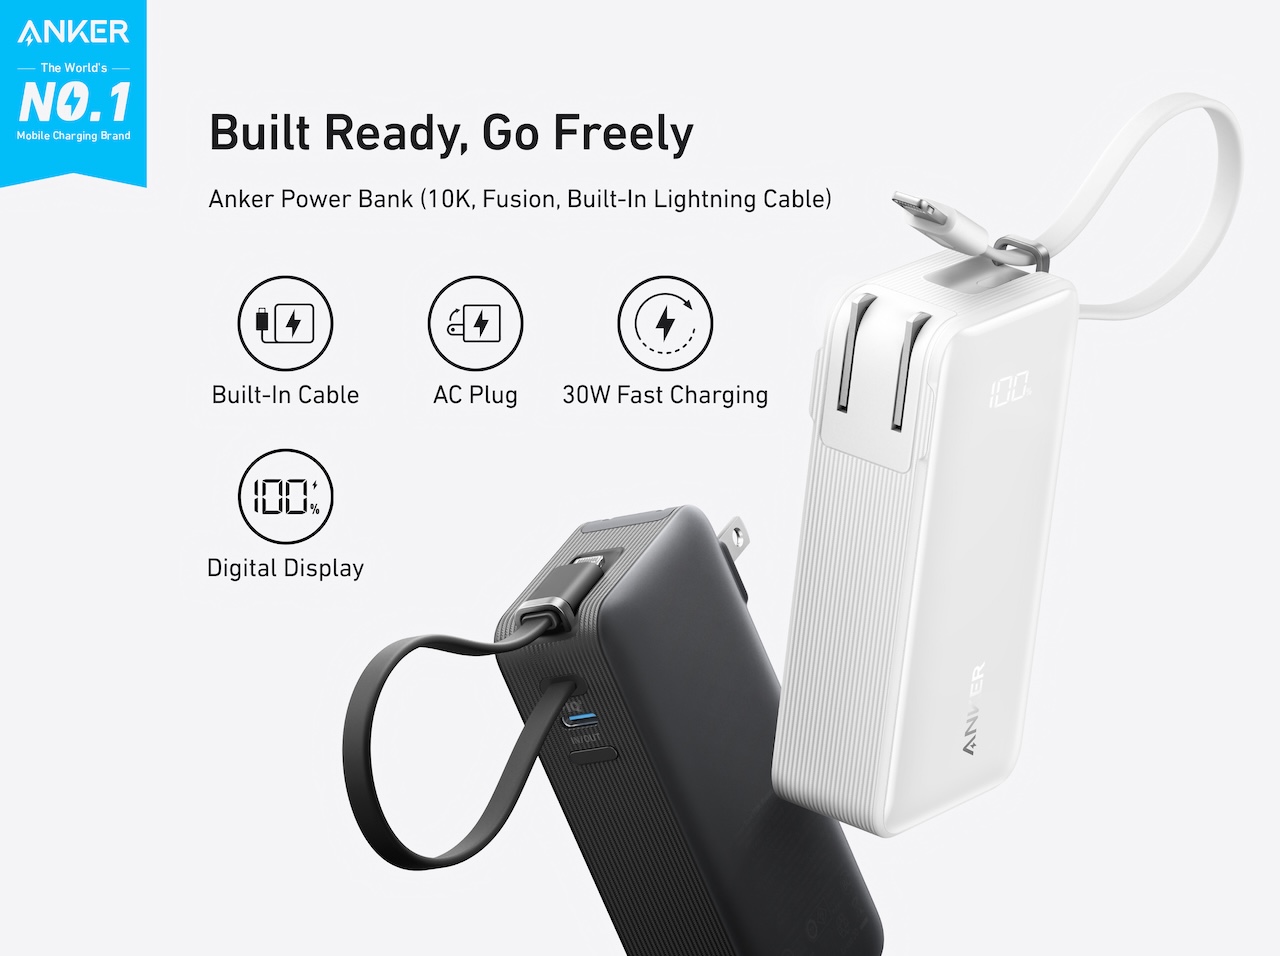 Anker Power Bank (10K, Fusion, Built-In Lightning Cable)